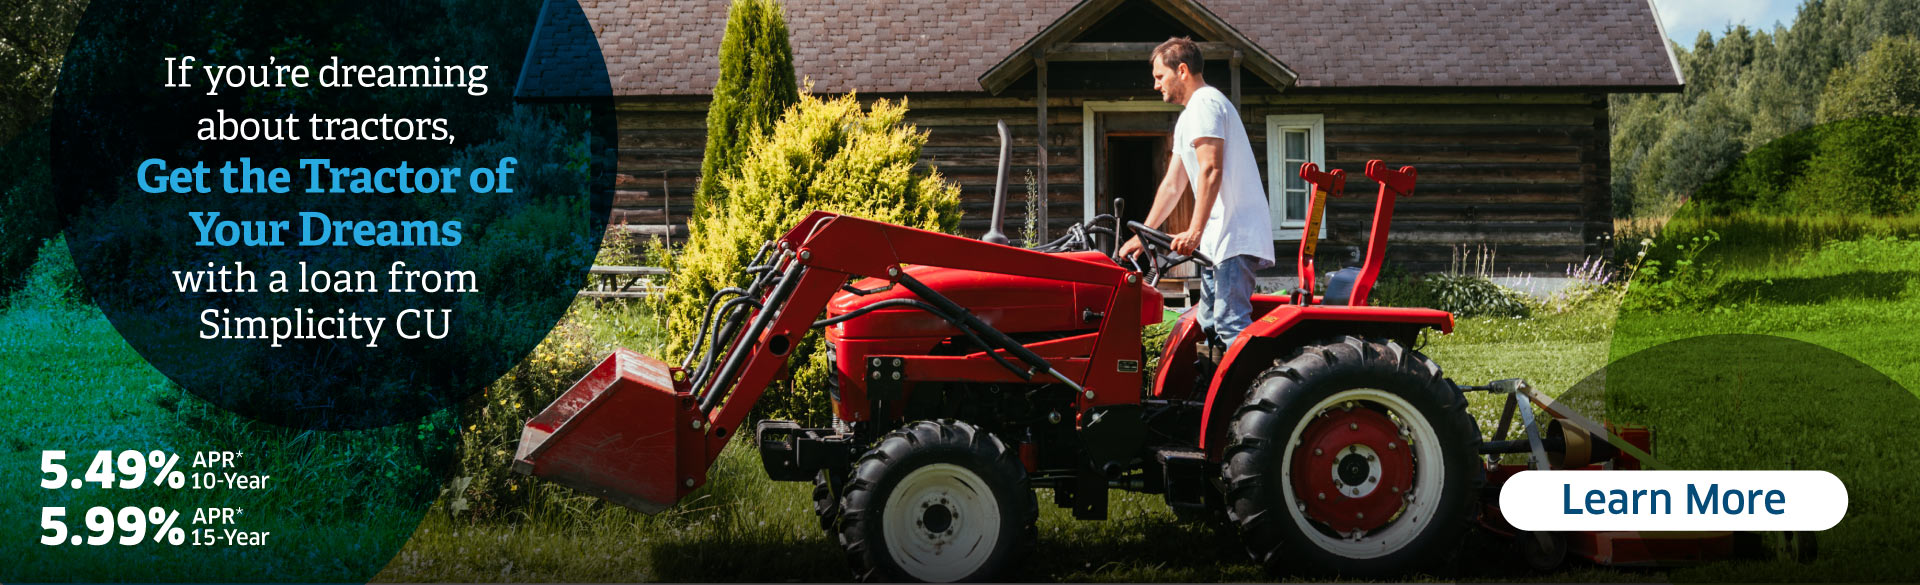 Get the Tractor of Your Dreams with a loan from Simplicity CU